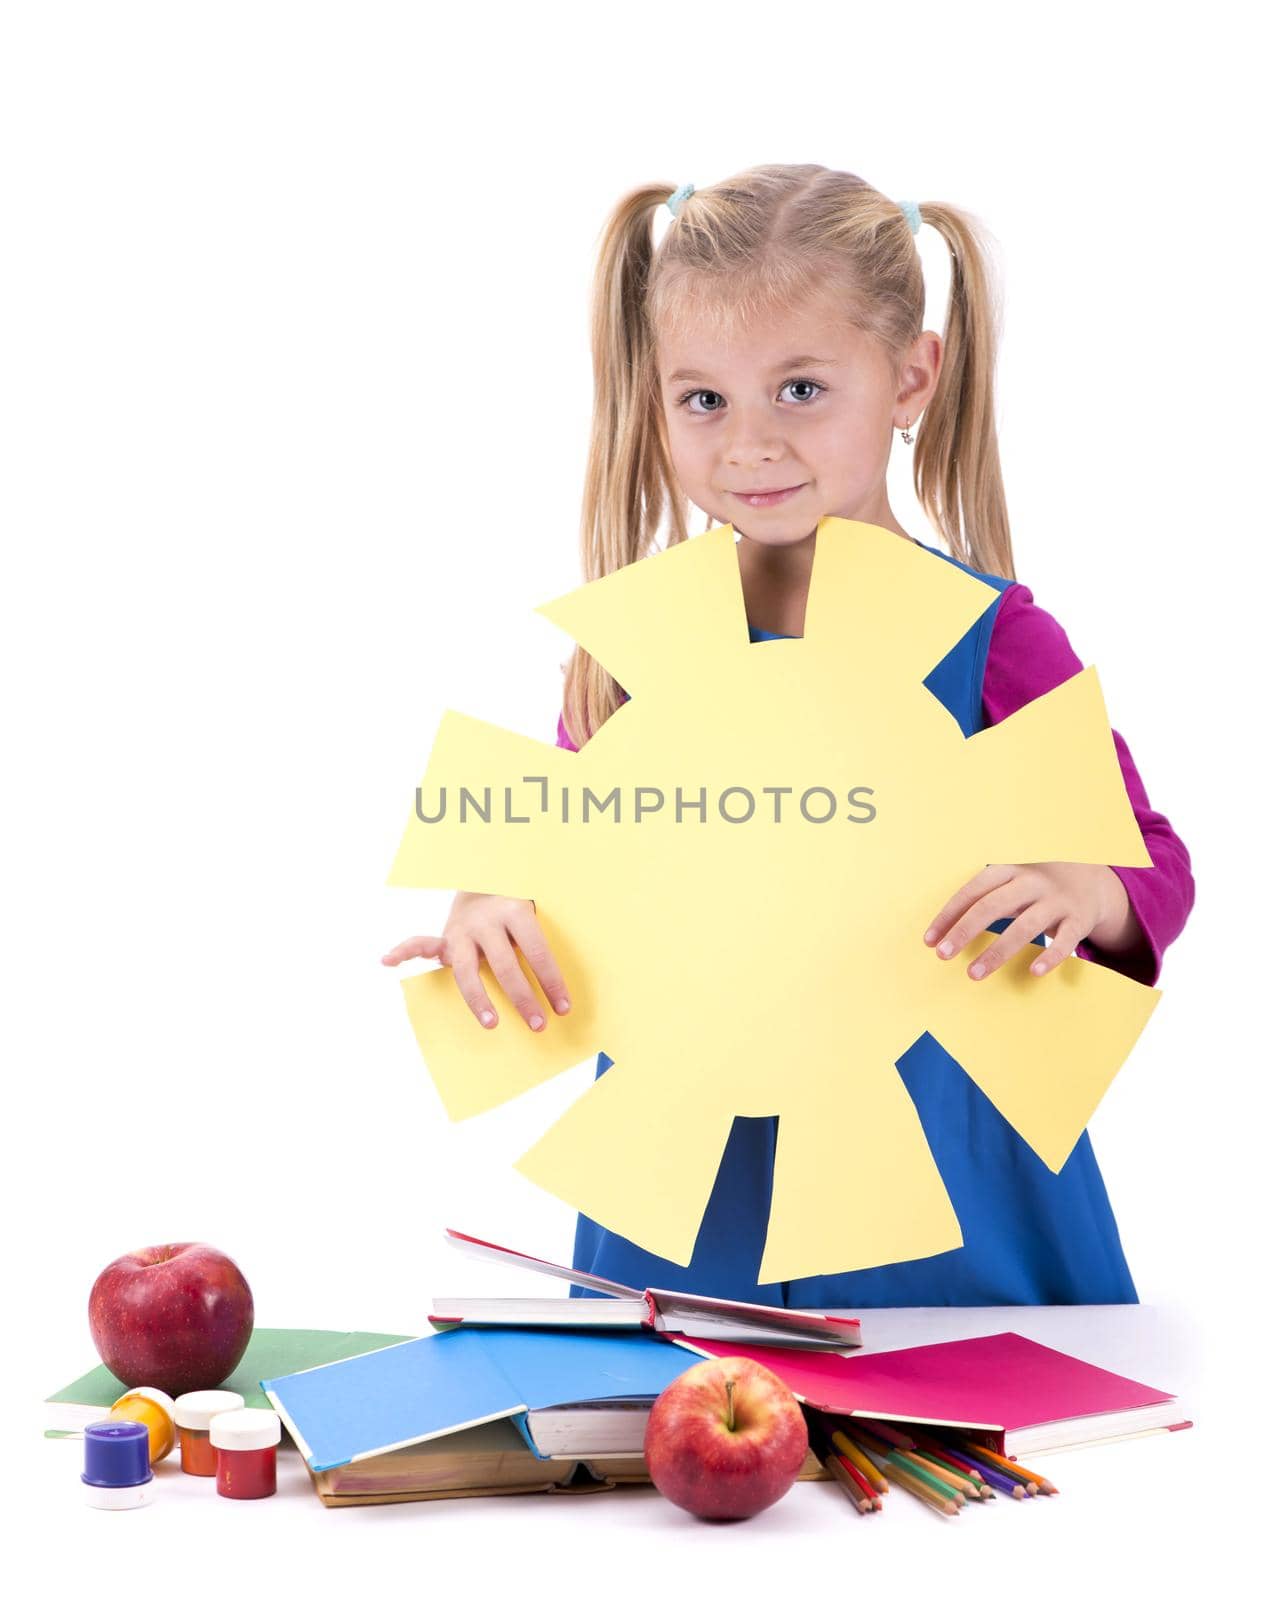 Creativity concept. hild and creativity. girl cuts the sun out of colored paper. isolated on white by aprilphoto